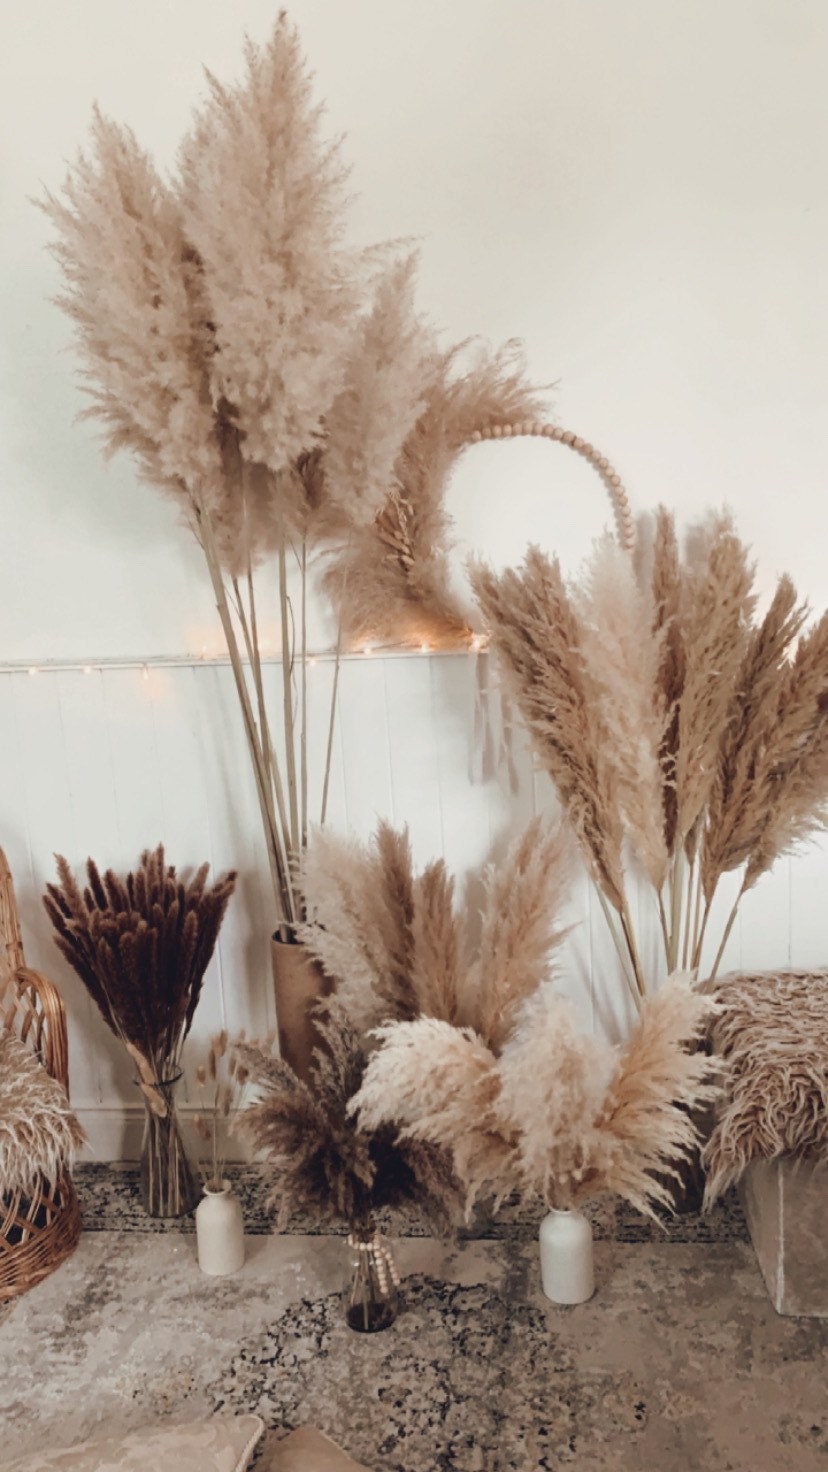 Sale extra large cream fluffy natural pampas grass 60-120cm/ pampas bouquet , gift for her,  gift UK, dried flowers, pampass grass